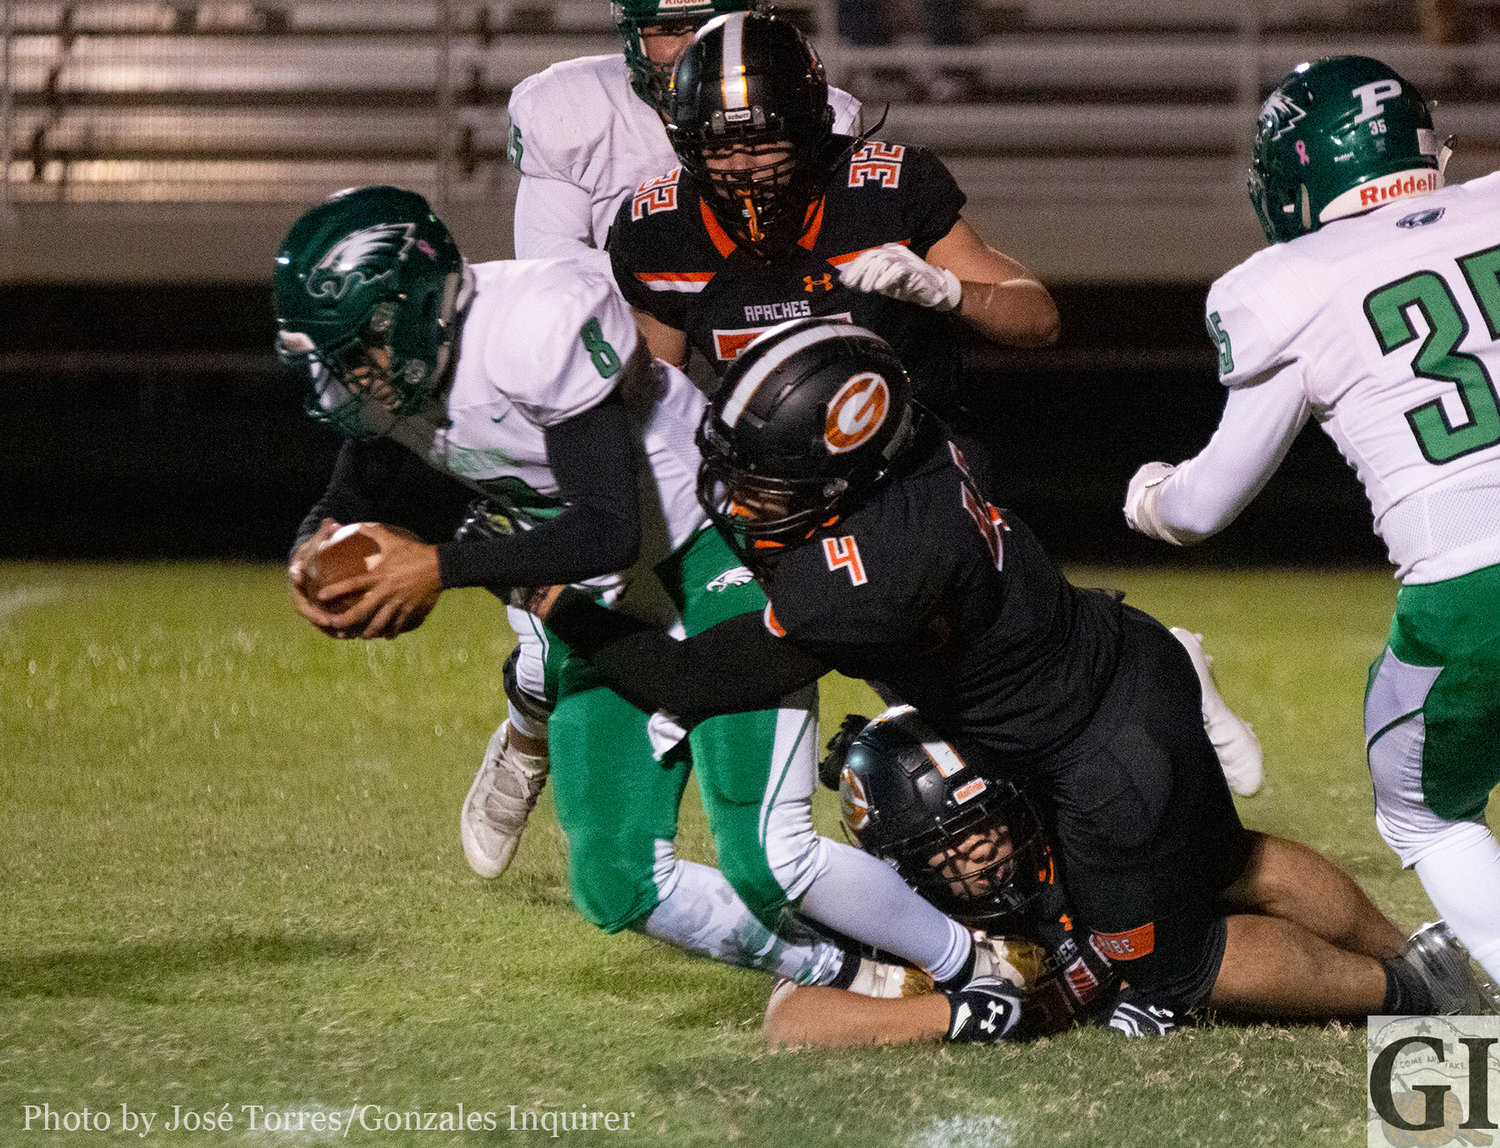 Lion Williamson (4), with the help of Zachary Box (24) down low, came up with a sack early in the third quarter in Gonzales' 20-13 victory over Pleasanton.